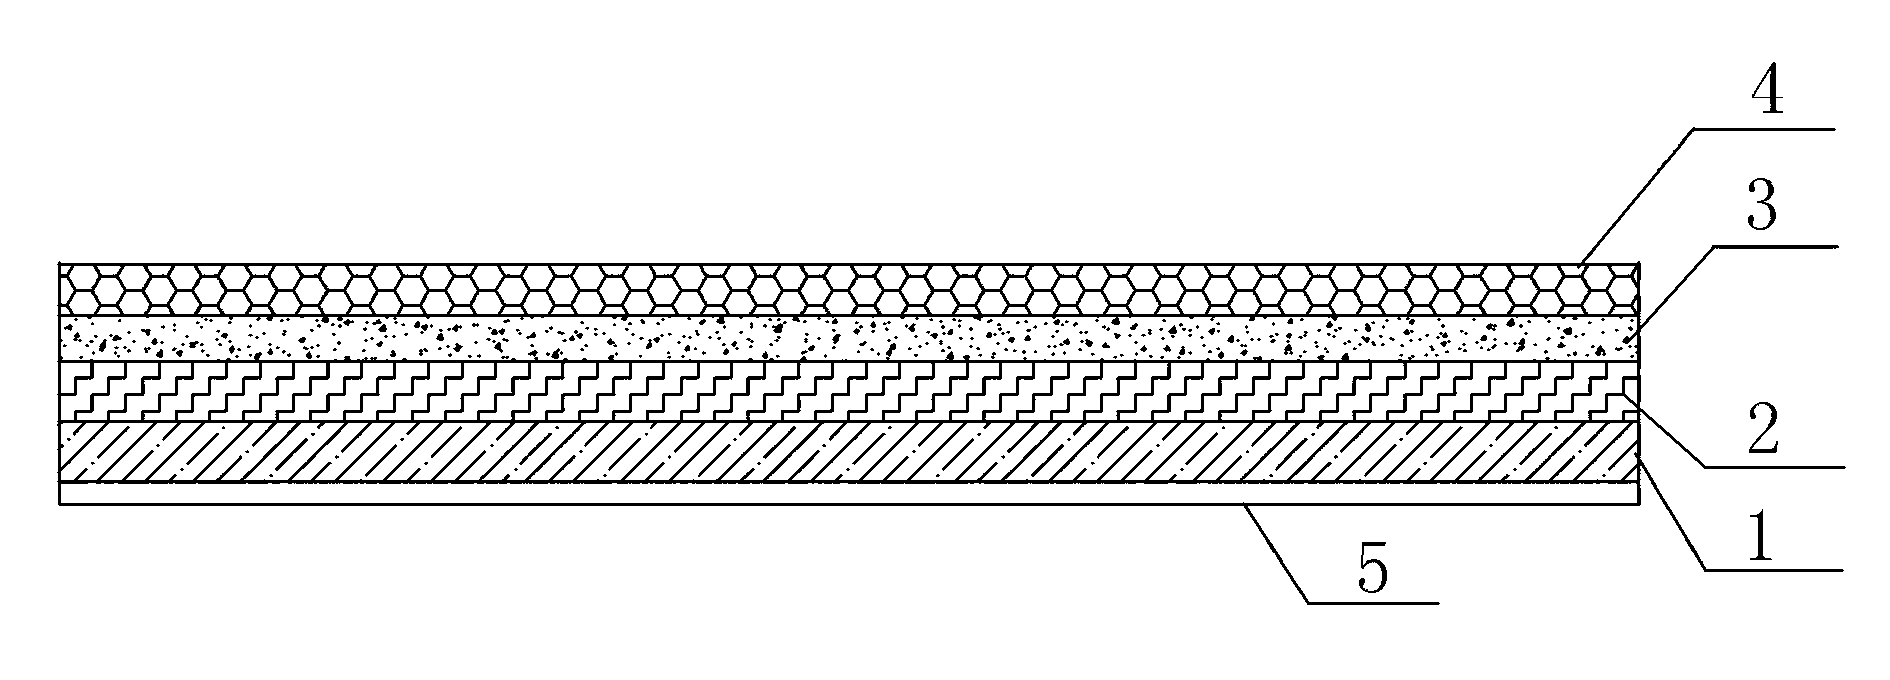 Granulation-free ecological plate high-pressure decorative surface material and manufacturing method thereof